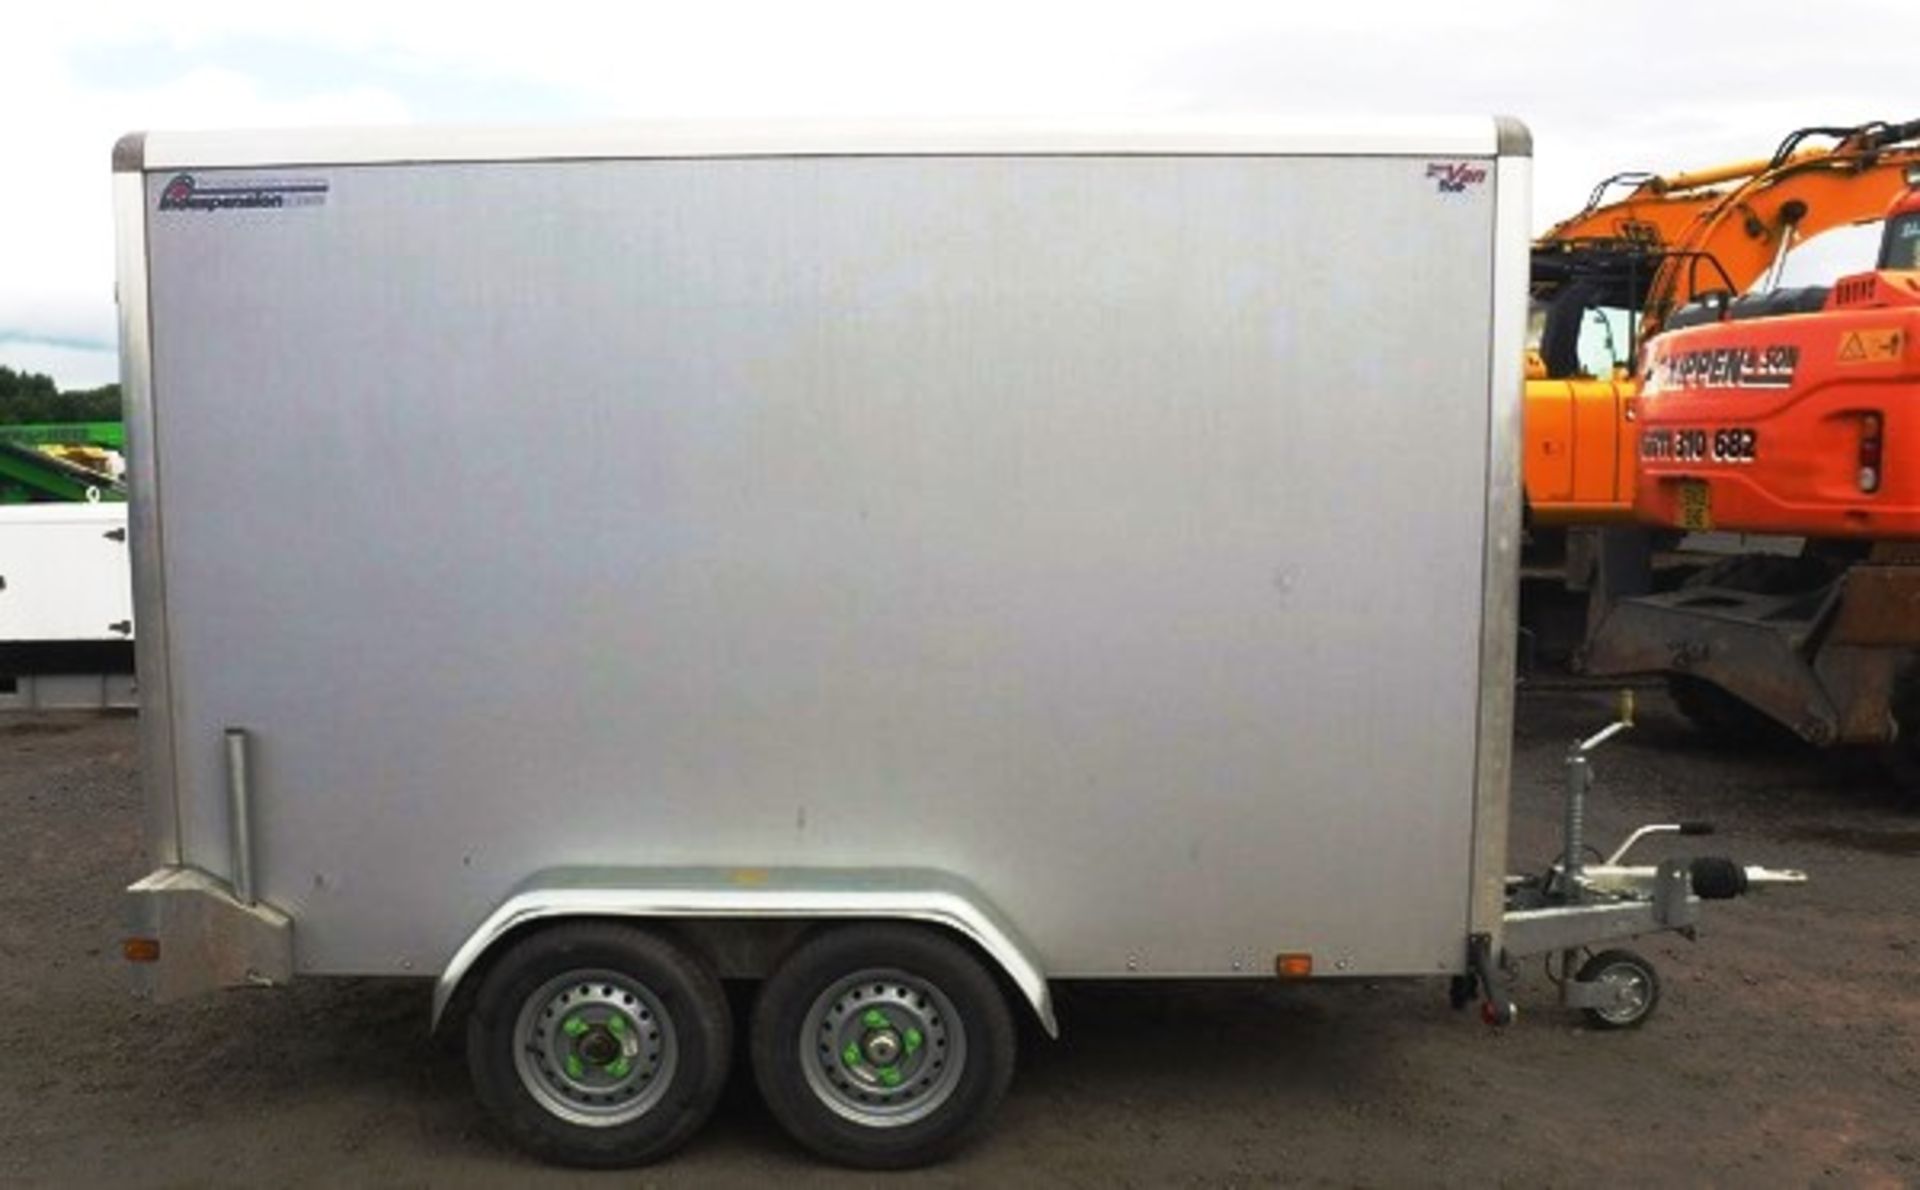 INDESPENSION BOX TRAILER WITH 2 OPENING BACK DOORS & 1 SIDE DOOR, 10FT X 5FT (APPROX) S/N213526 ASSE - Image 8 of 12